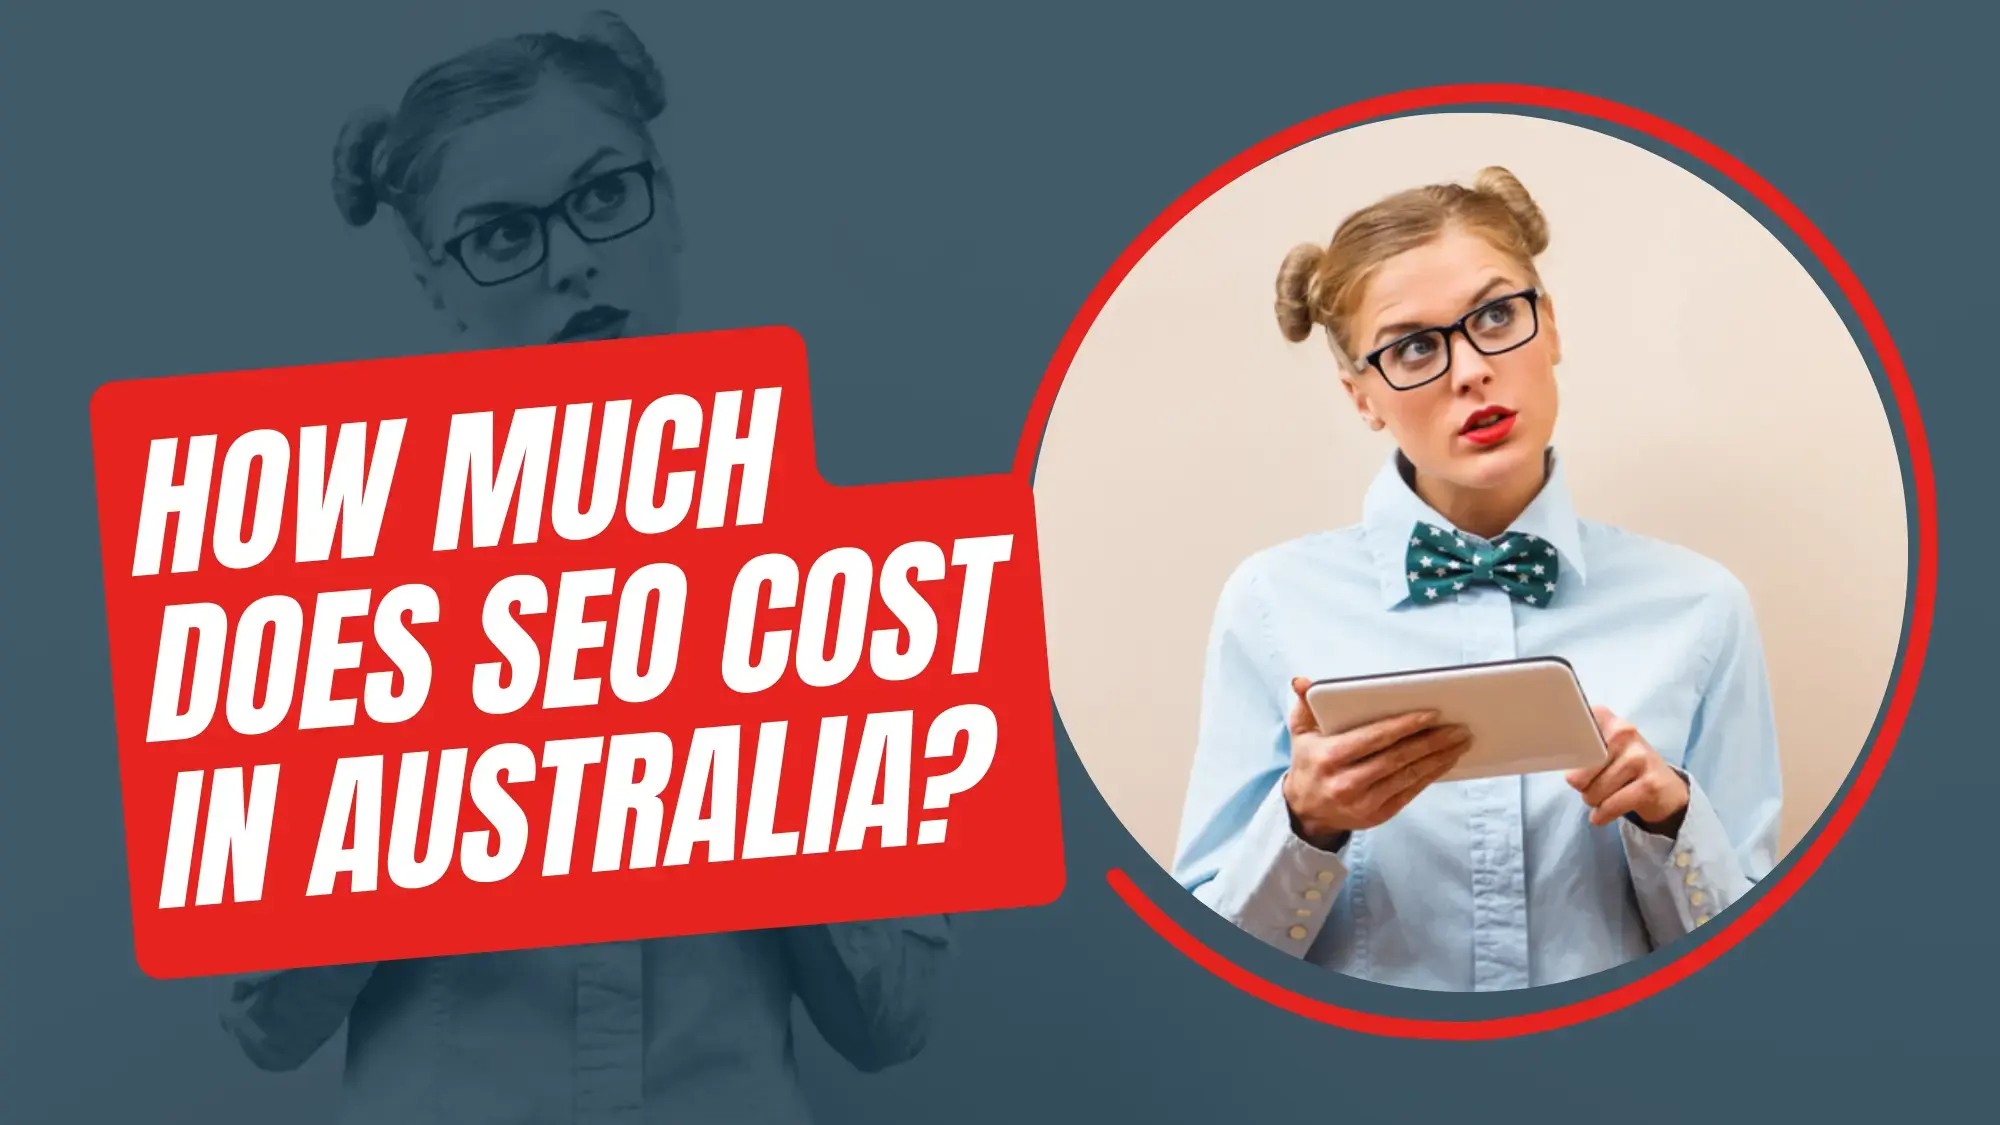 How much does SEO cost in Australia?